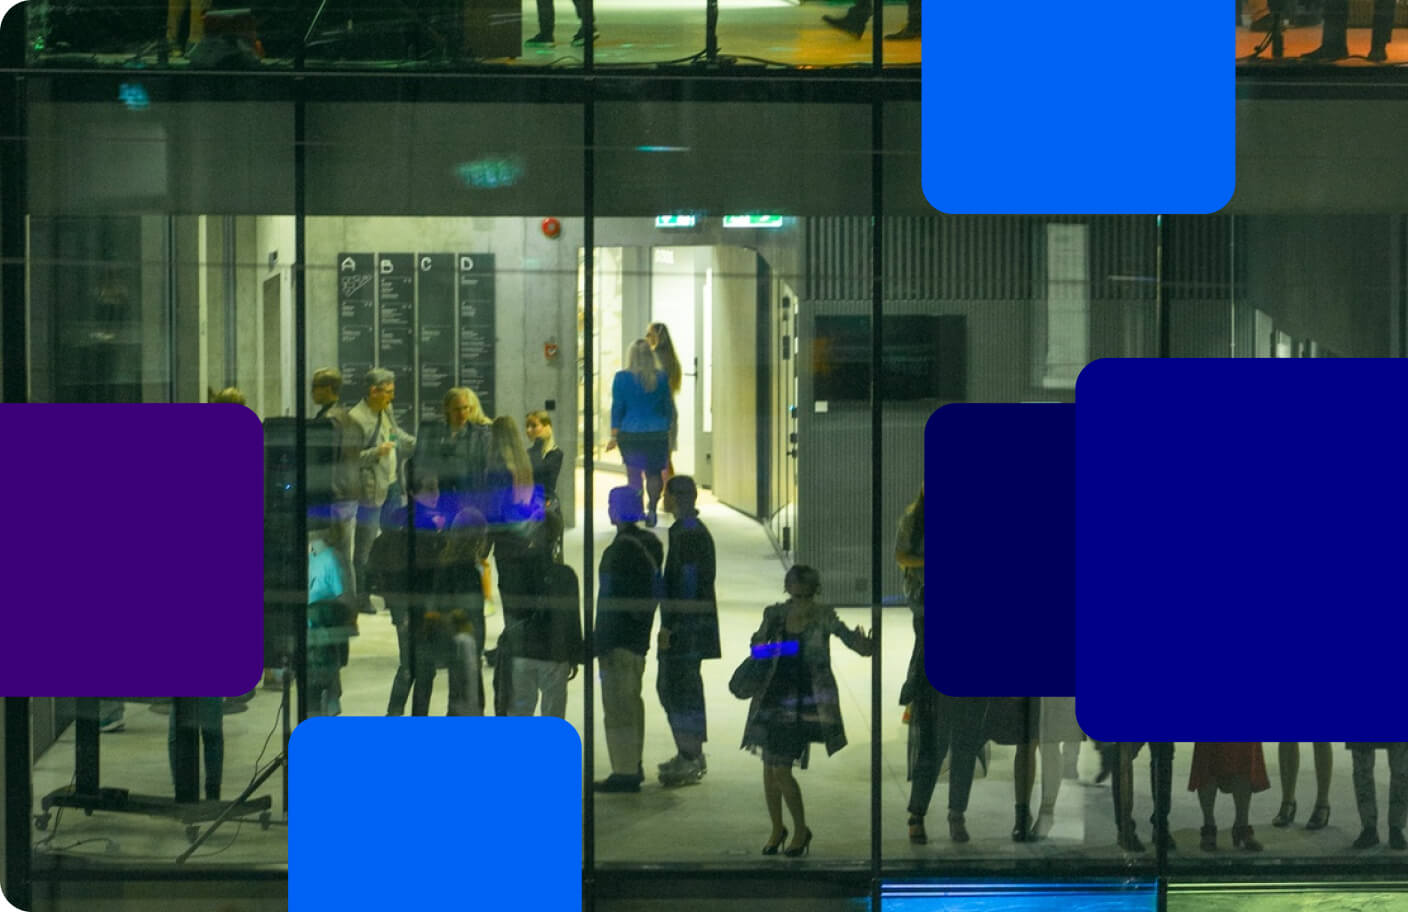 People networking - view through a transparent wall